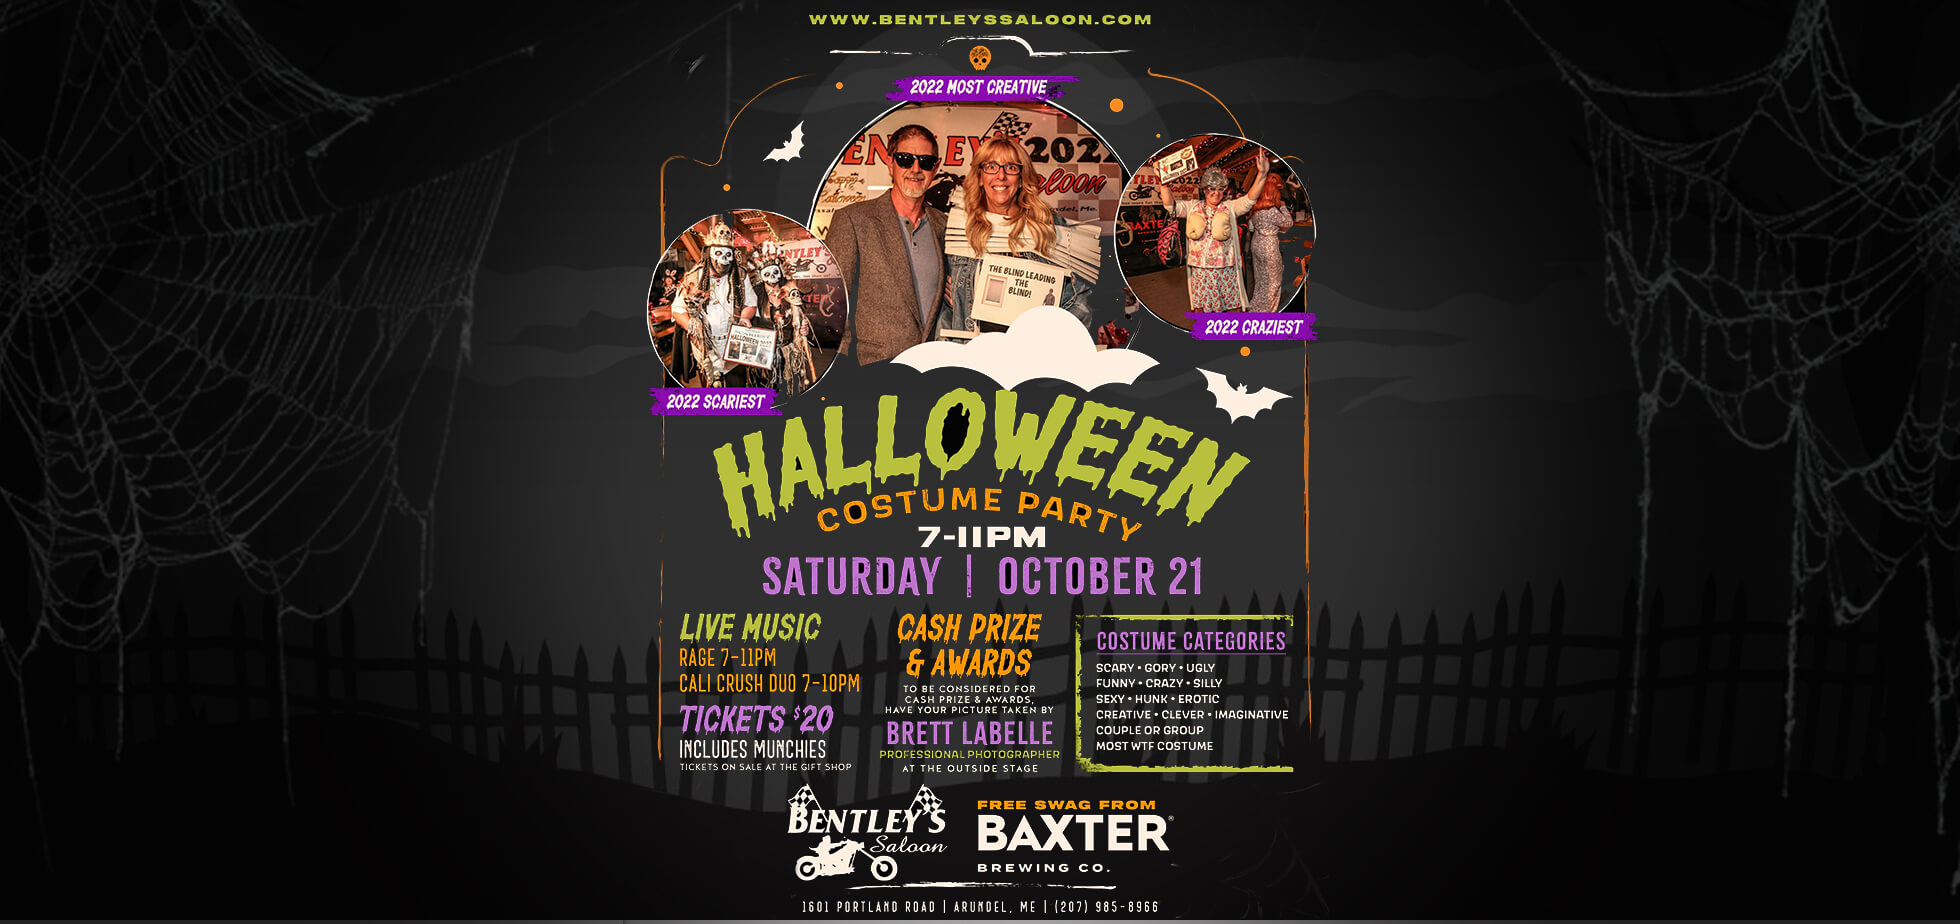 Graphic Image reading Halloween Costume Party at Bentley's Saloon on October 21'st